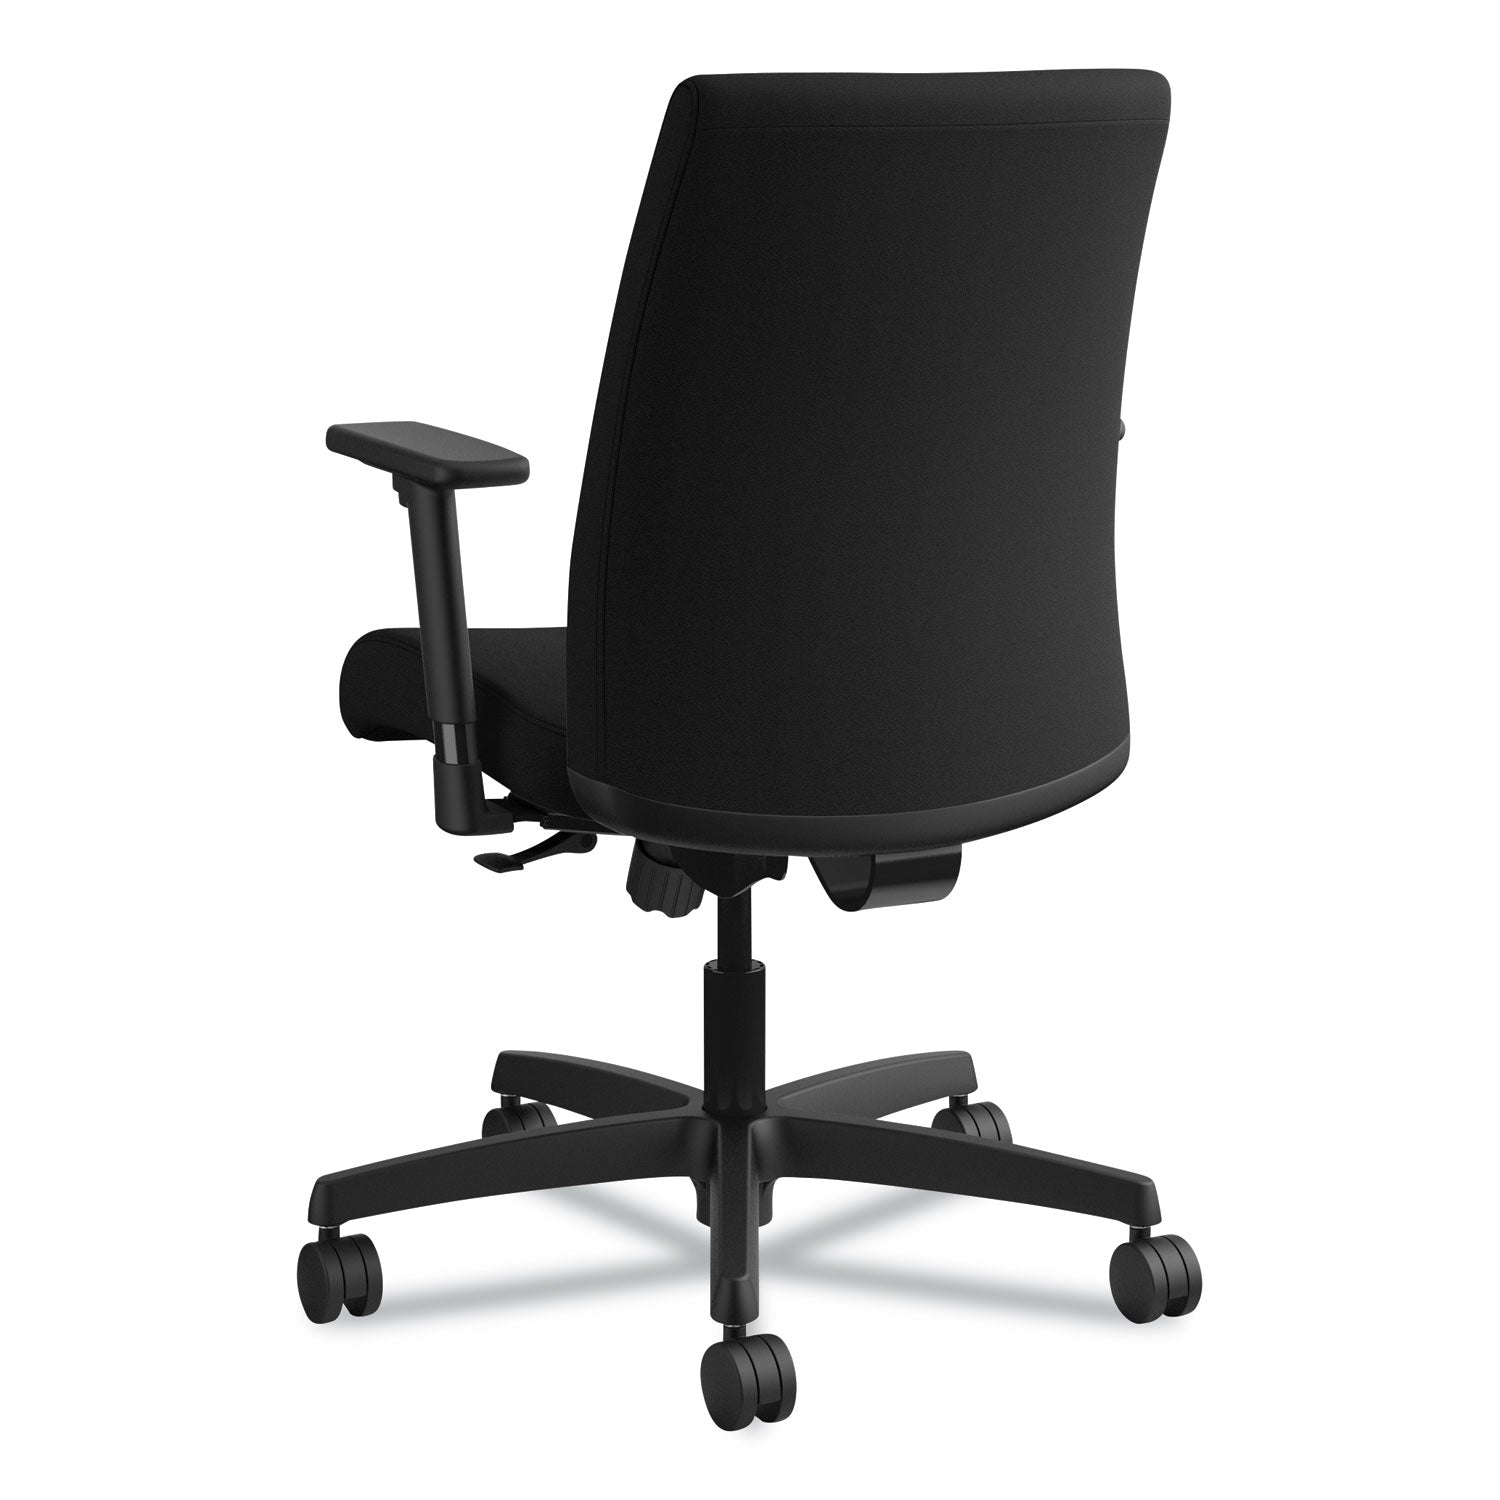 ignition-series-fabric-low-back-task-chair-supports-up-to-300-lb-17-to-215-seat-height-black_honit105cu10 - 8